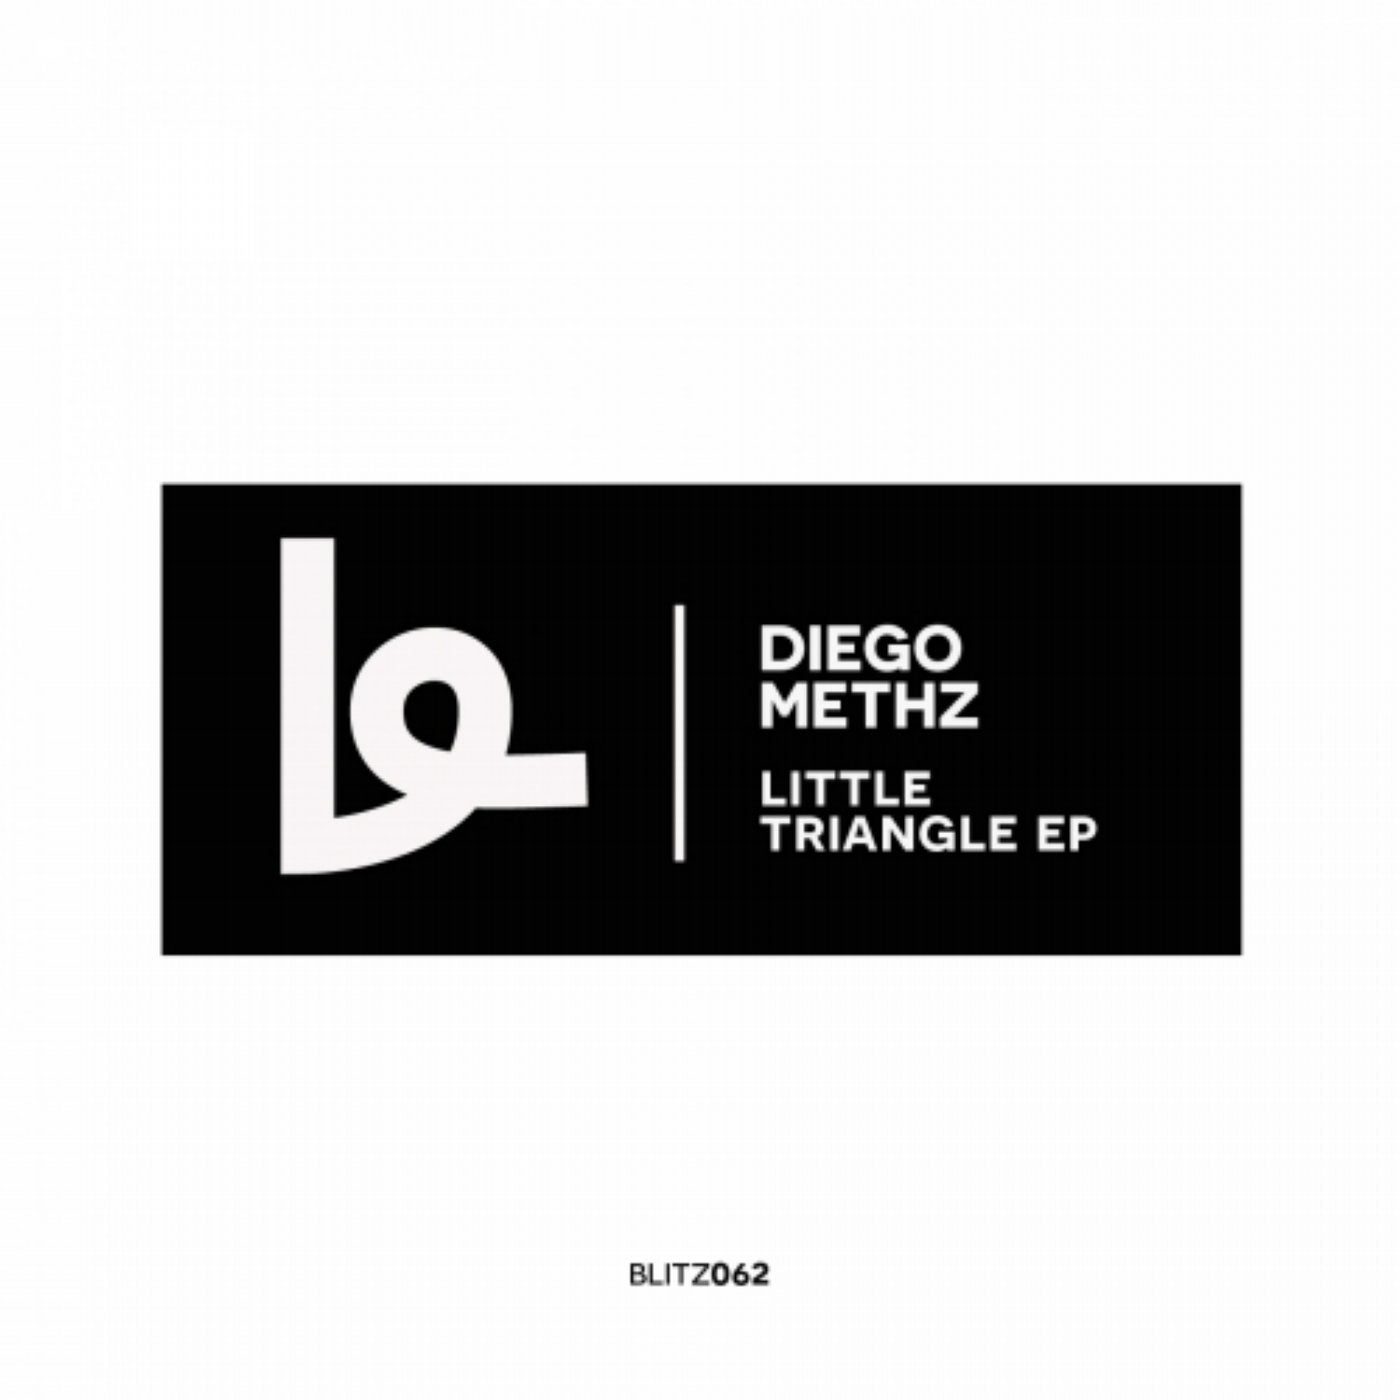 Little Triangle EP